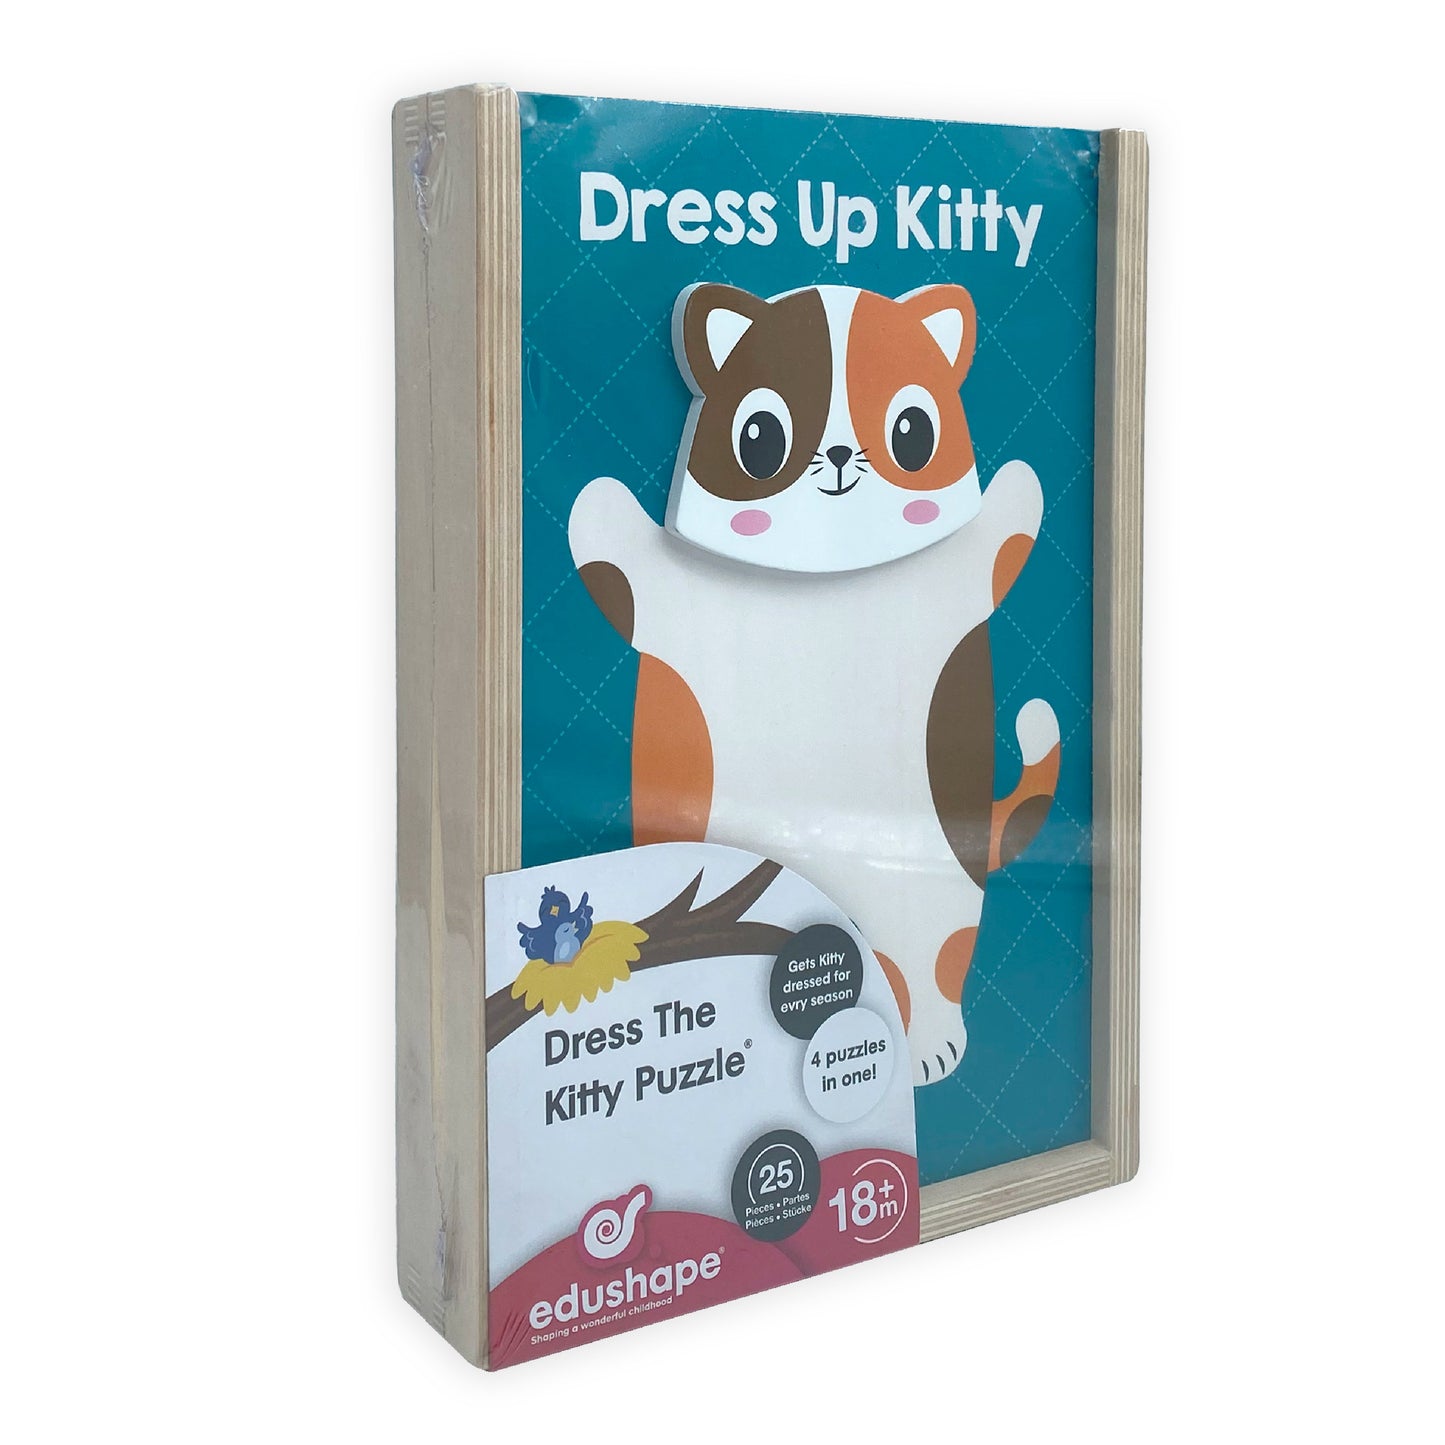 Dress the Kitty Puzzle